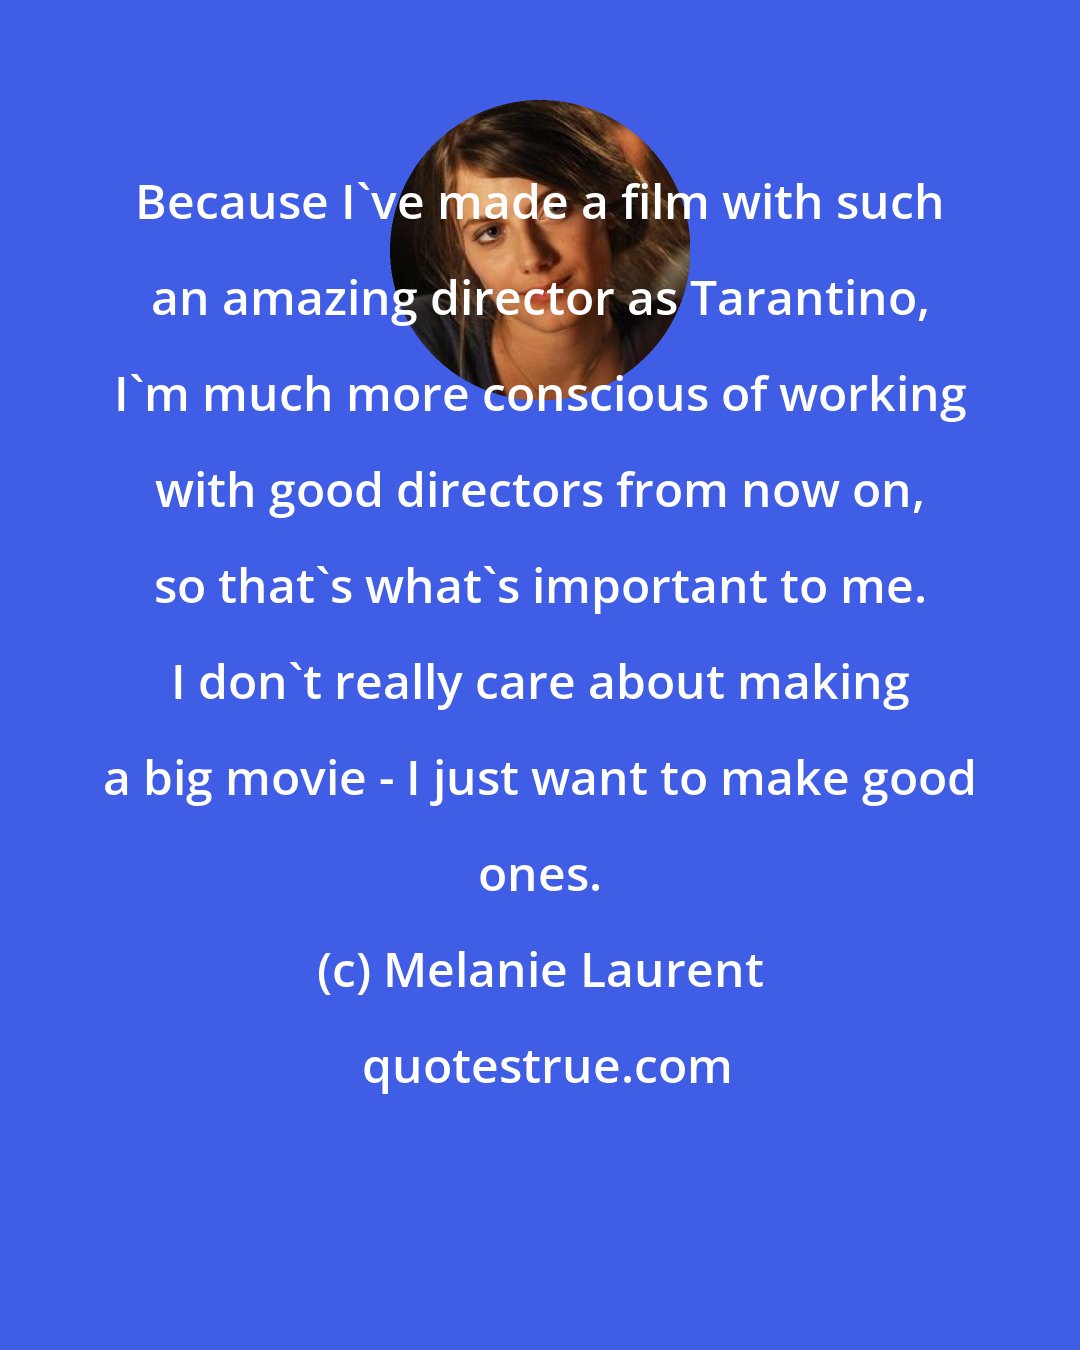 Melanie Laurent: Because I've made a film with such an amazing director as Tarantino, I'm much more conscious of working with good directors from now on, so that's what's important to me. I don't really care about making a big movie - I just want to make good ones.